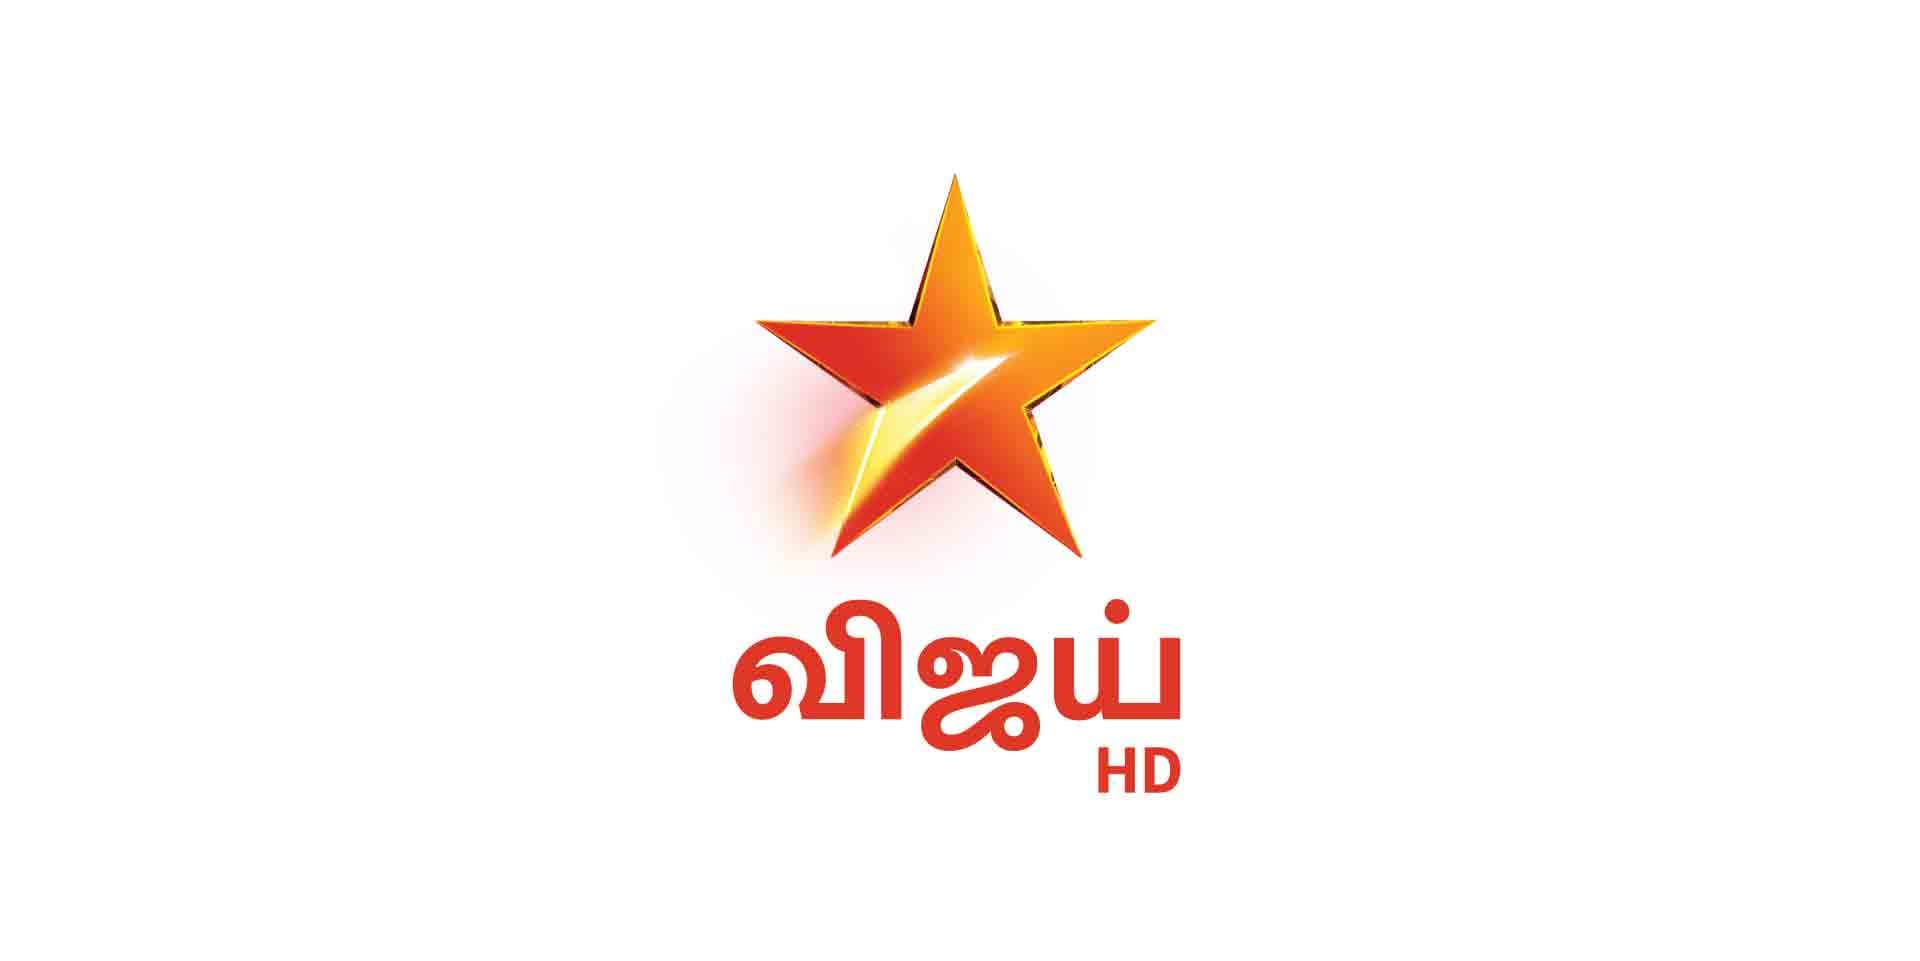 Vijay Tv logo Changed | Page 3 | DreamDTH Forums - Television Discussion  Community